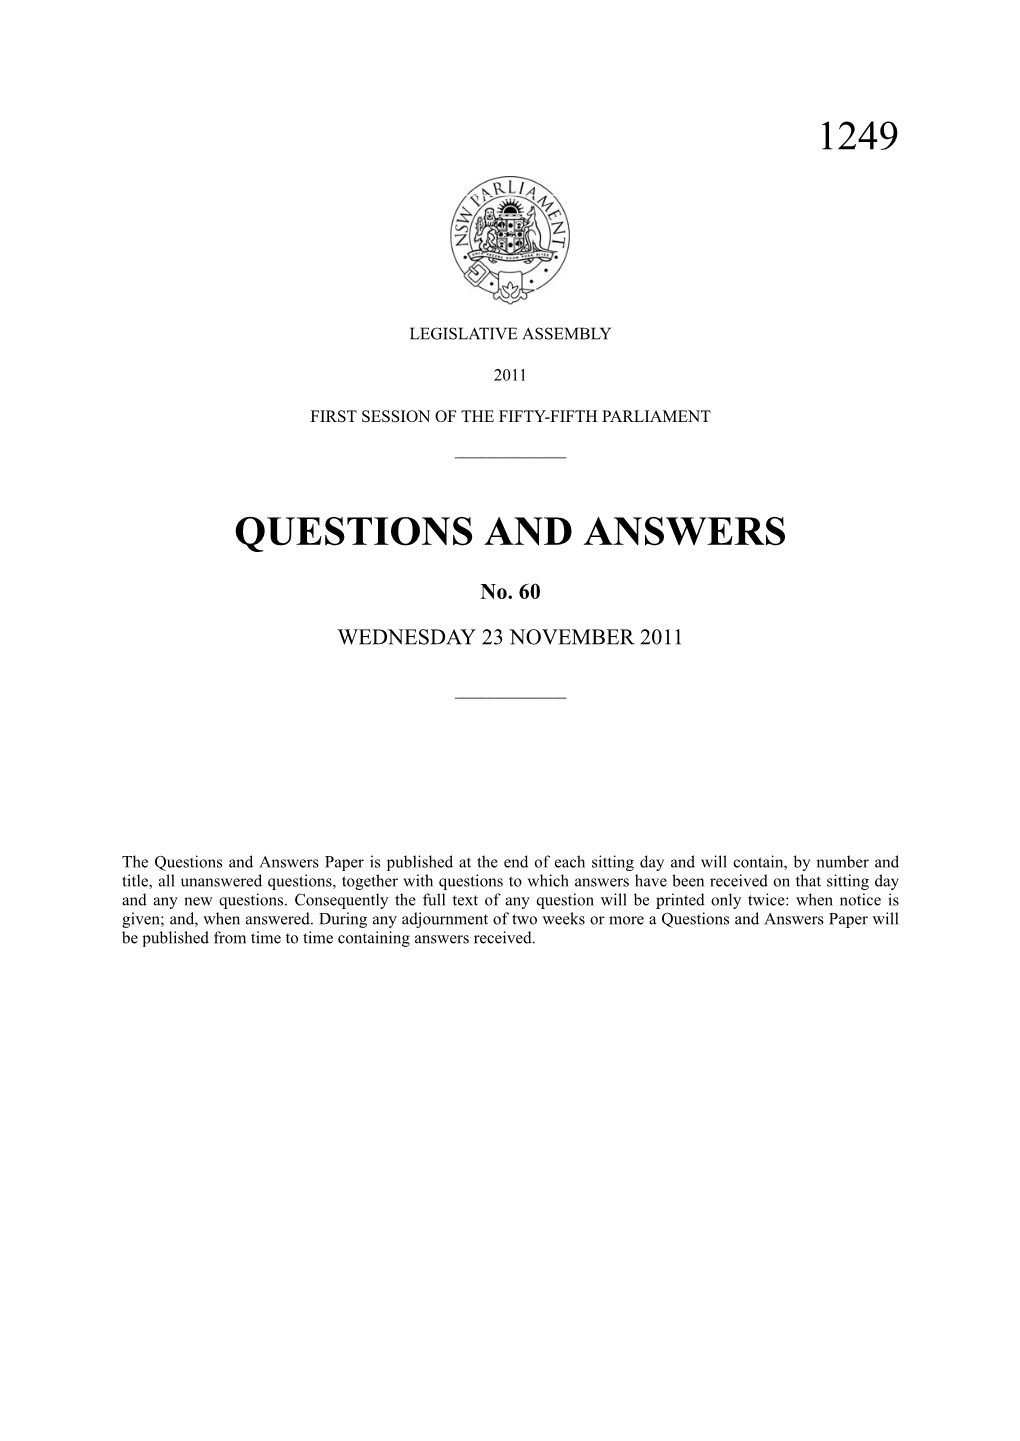 Questions and Answers 1249